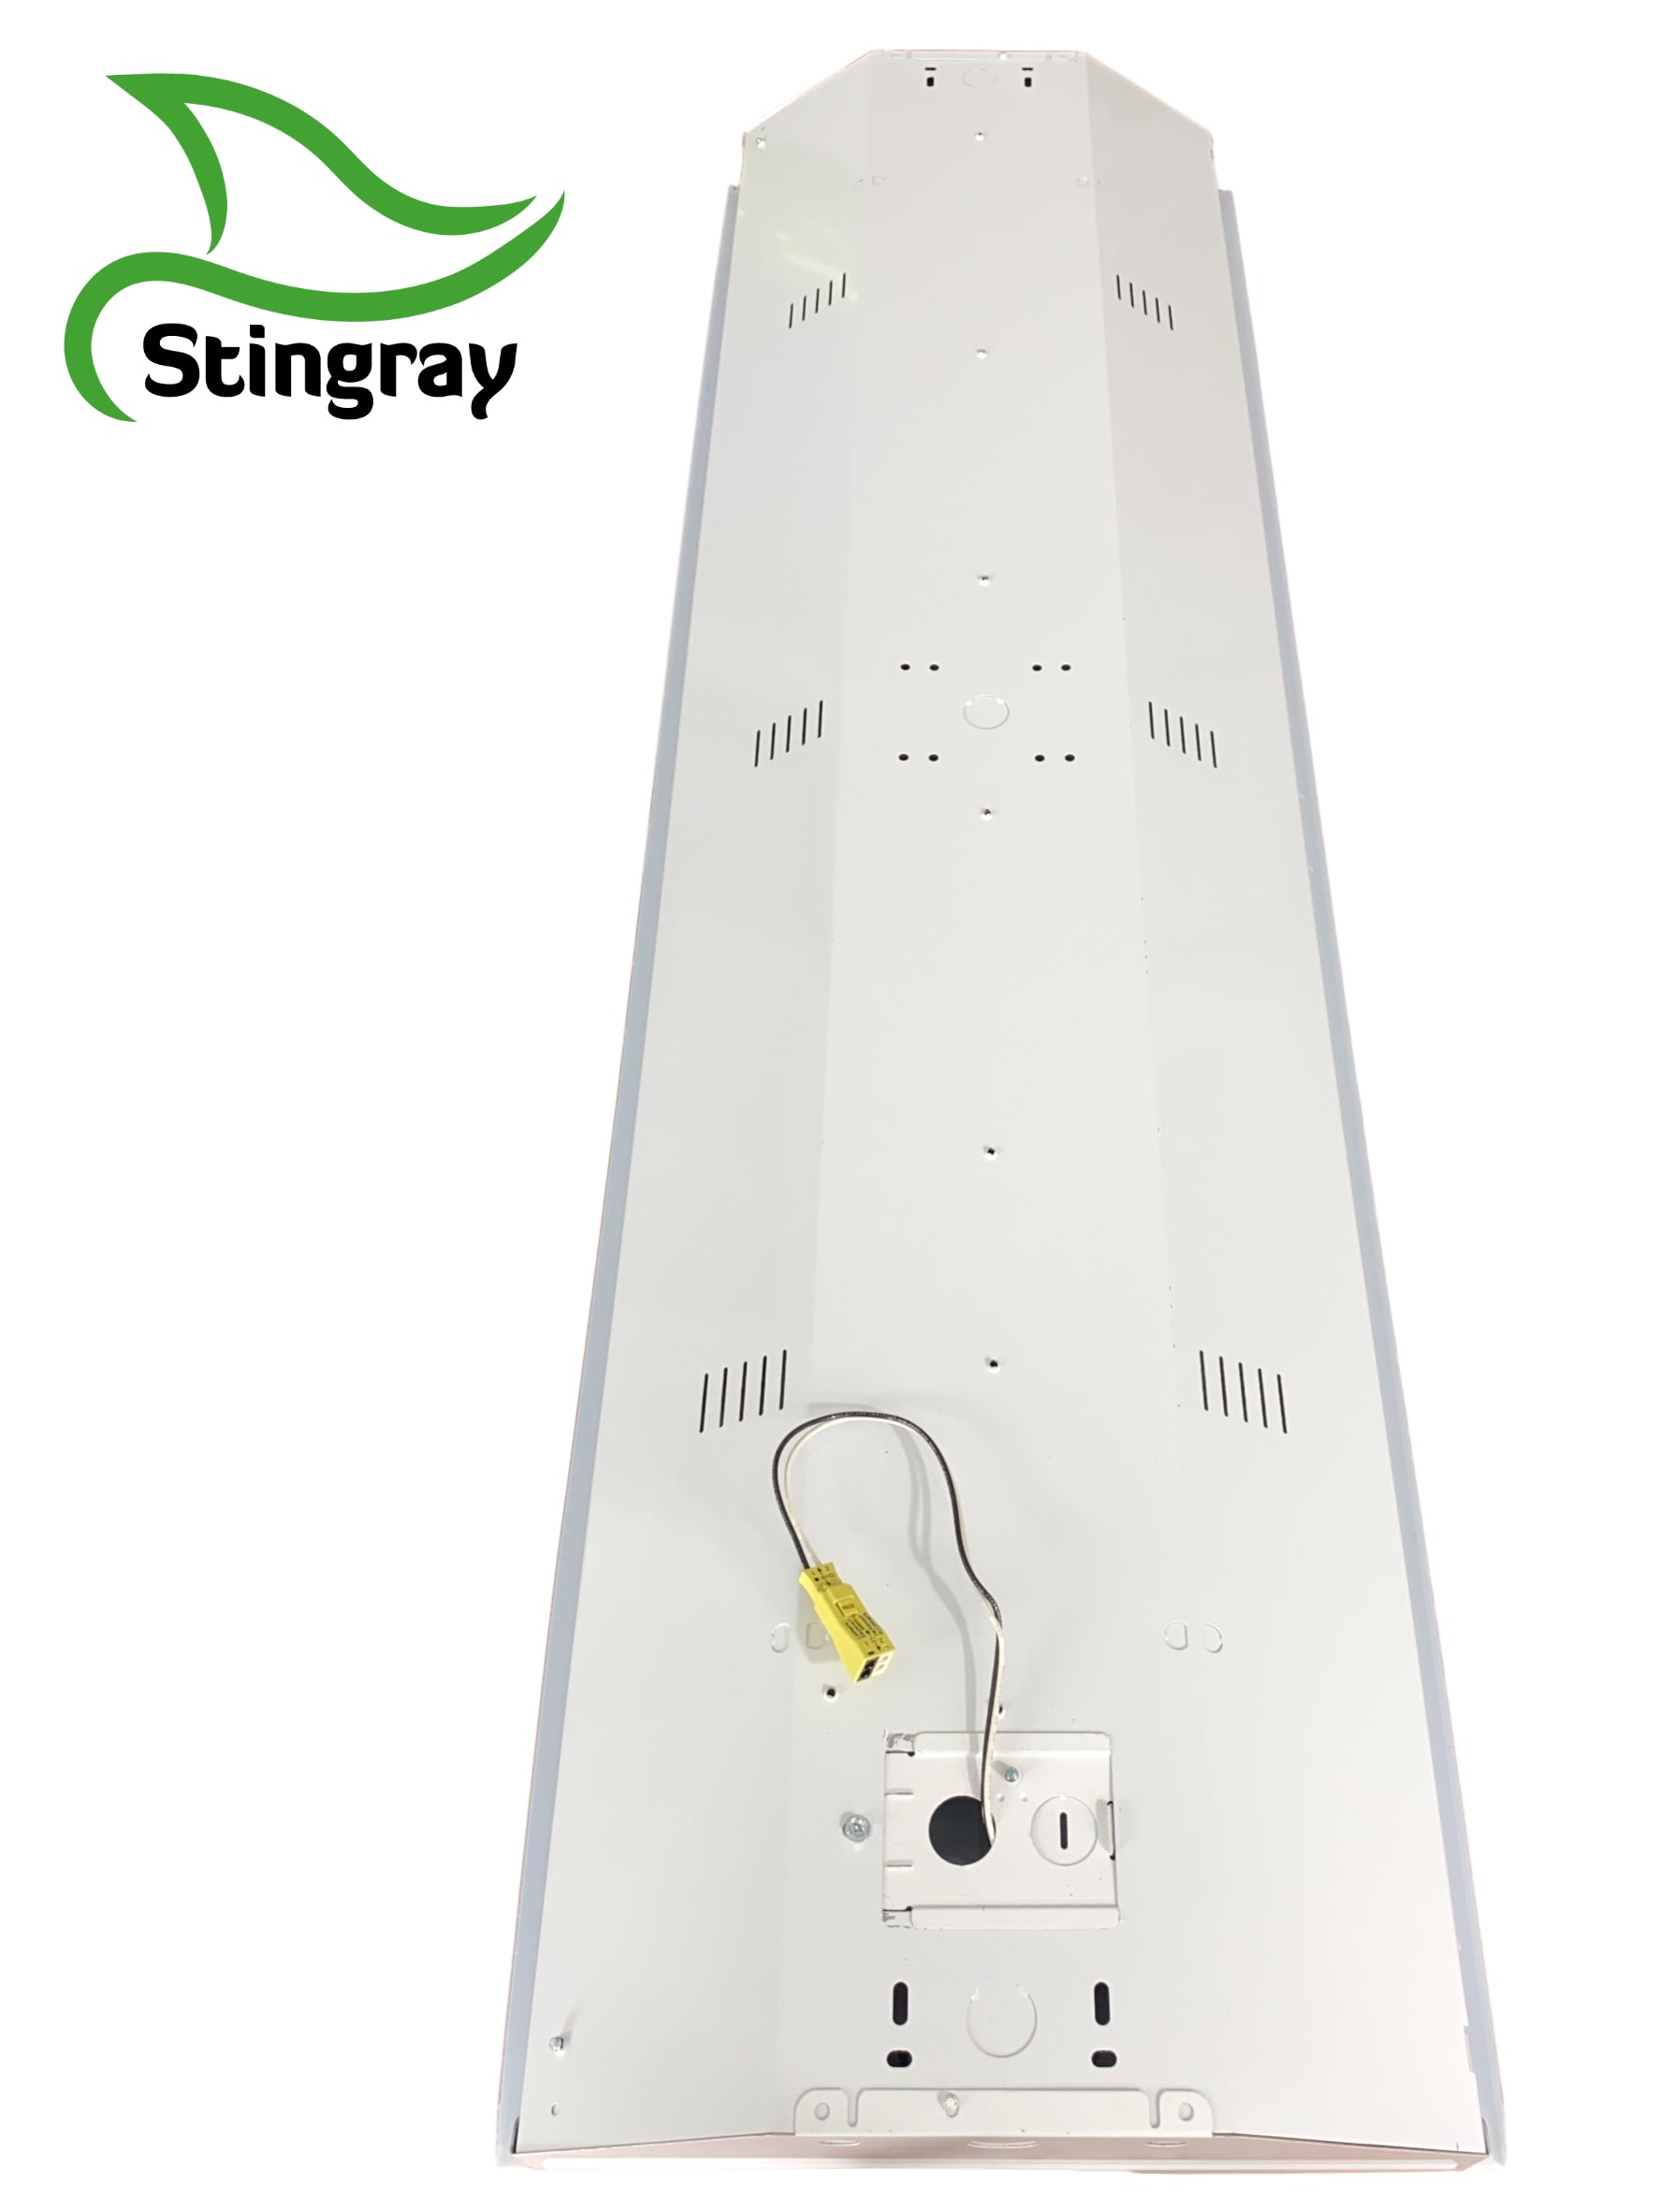 LED StingRay 6 XL MOTION ACTIVATED Shop Light (CLEAR LED)